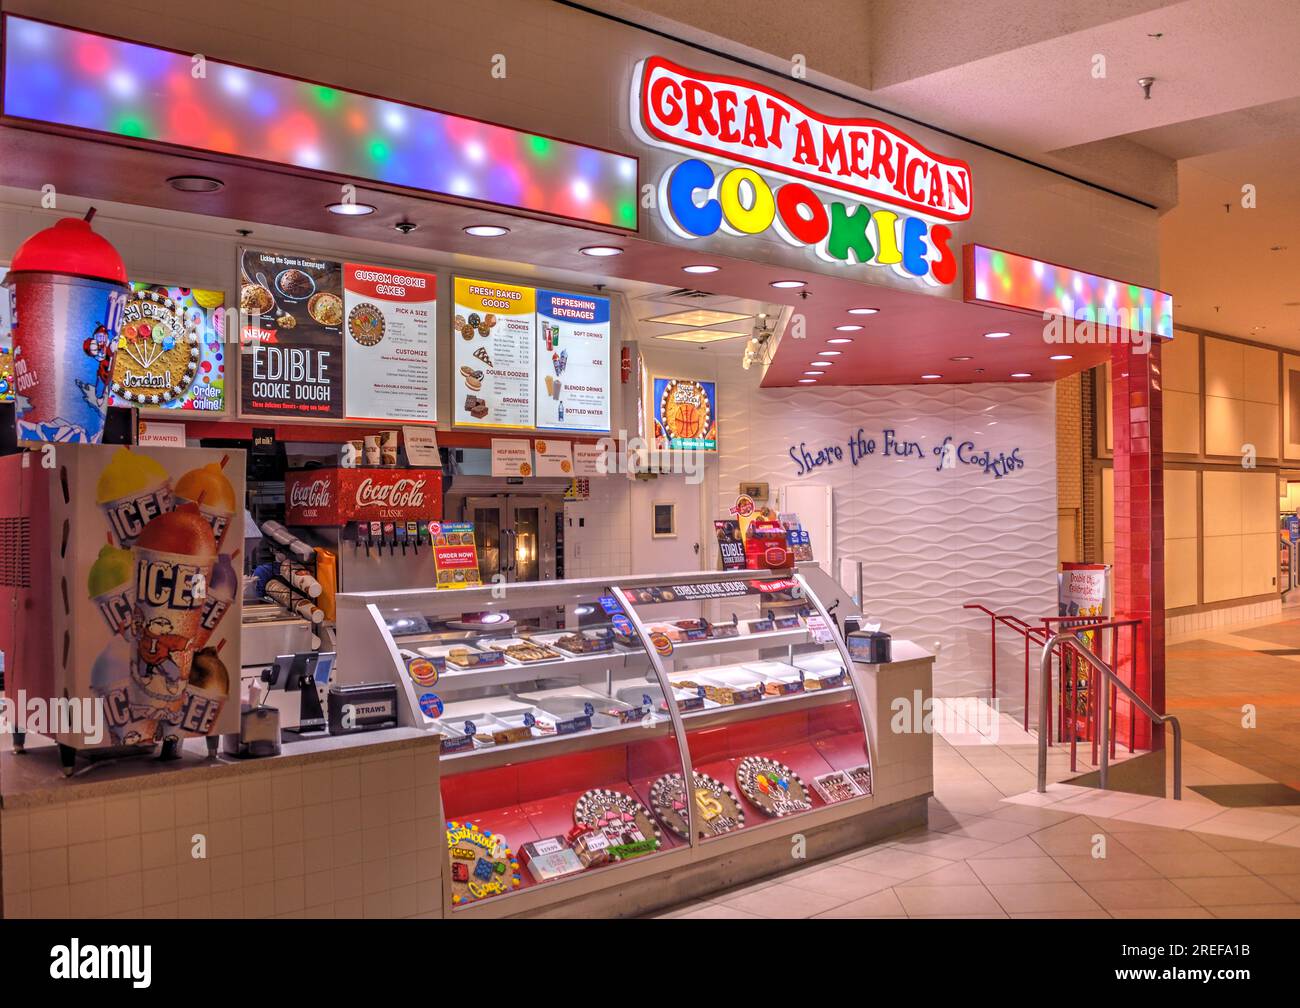 Springfield, Missouri - March 22, 2019: Great American Cookies is a chain of stores specializing in gourmet cookies and cakes headquartered in Atlanta Stock Photo